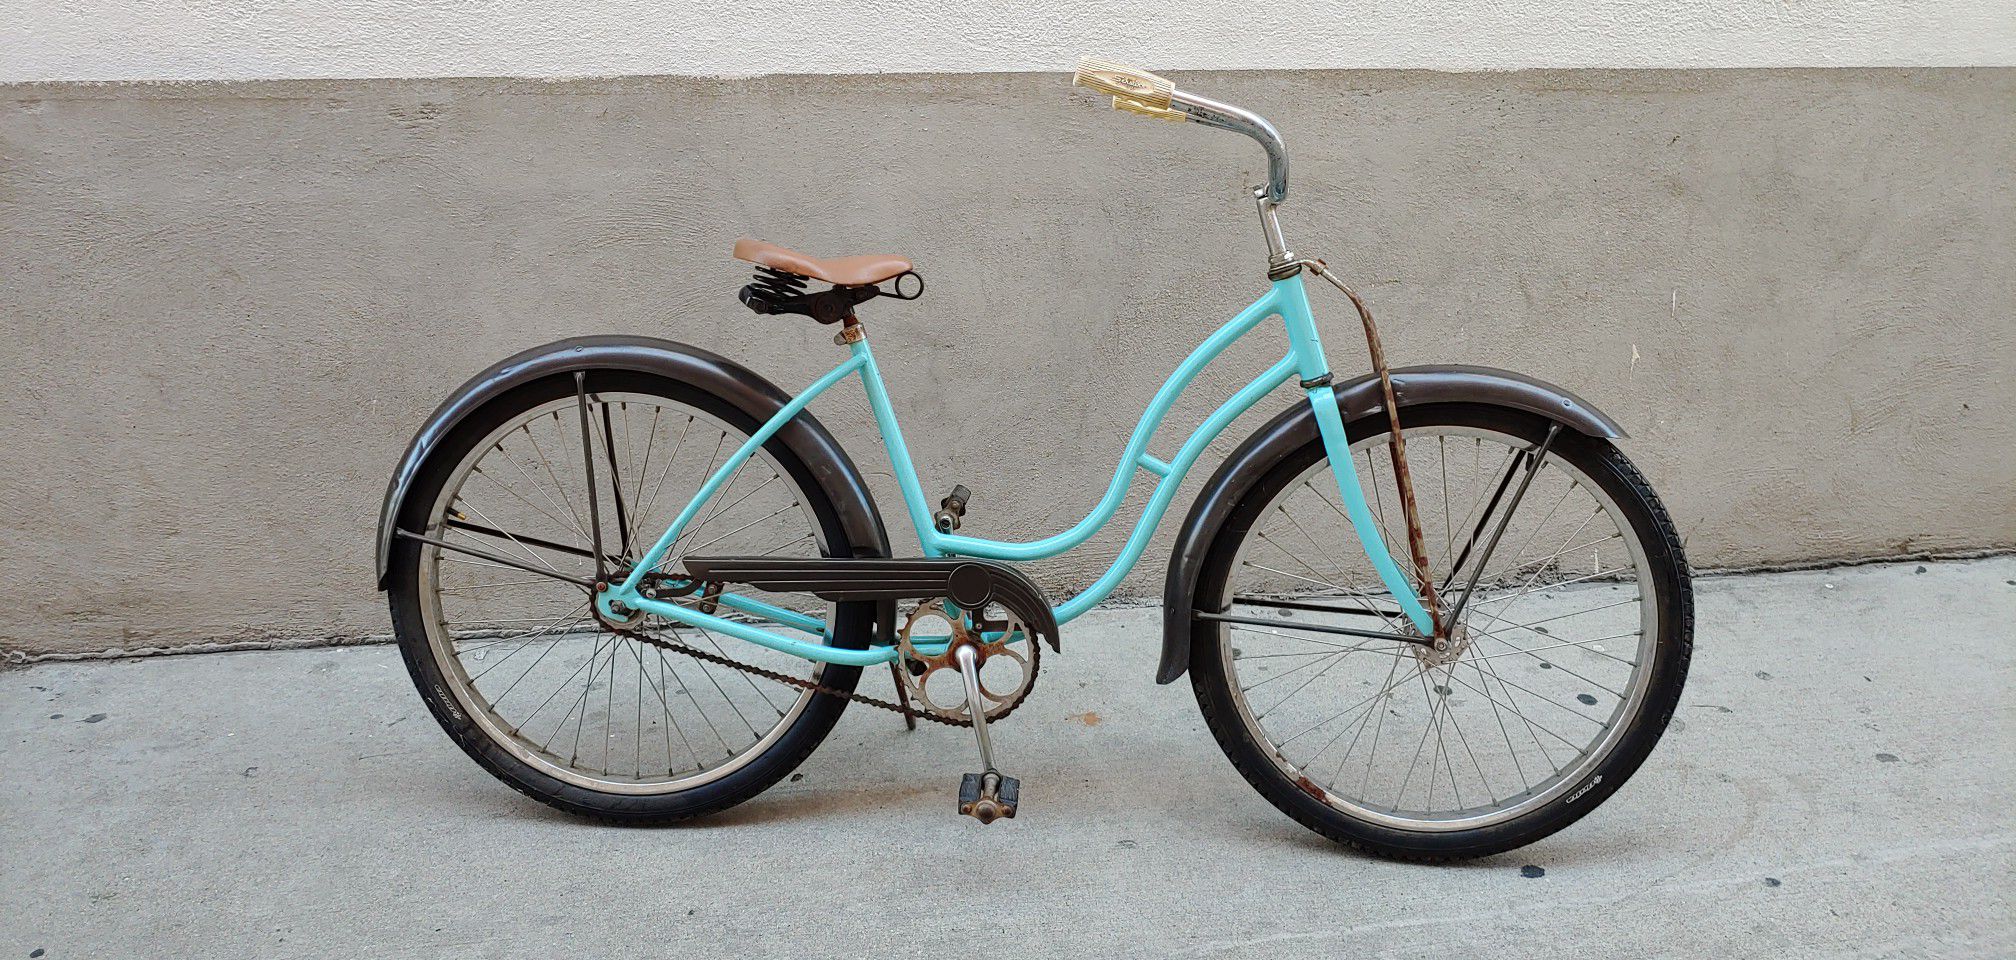 1947 Schwinn 26 inch Beach Cruiser bicycle. Rides and stops great.